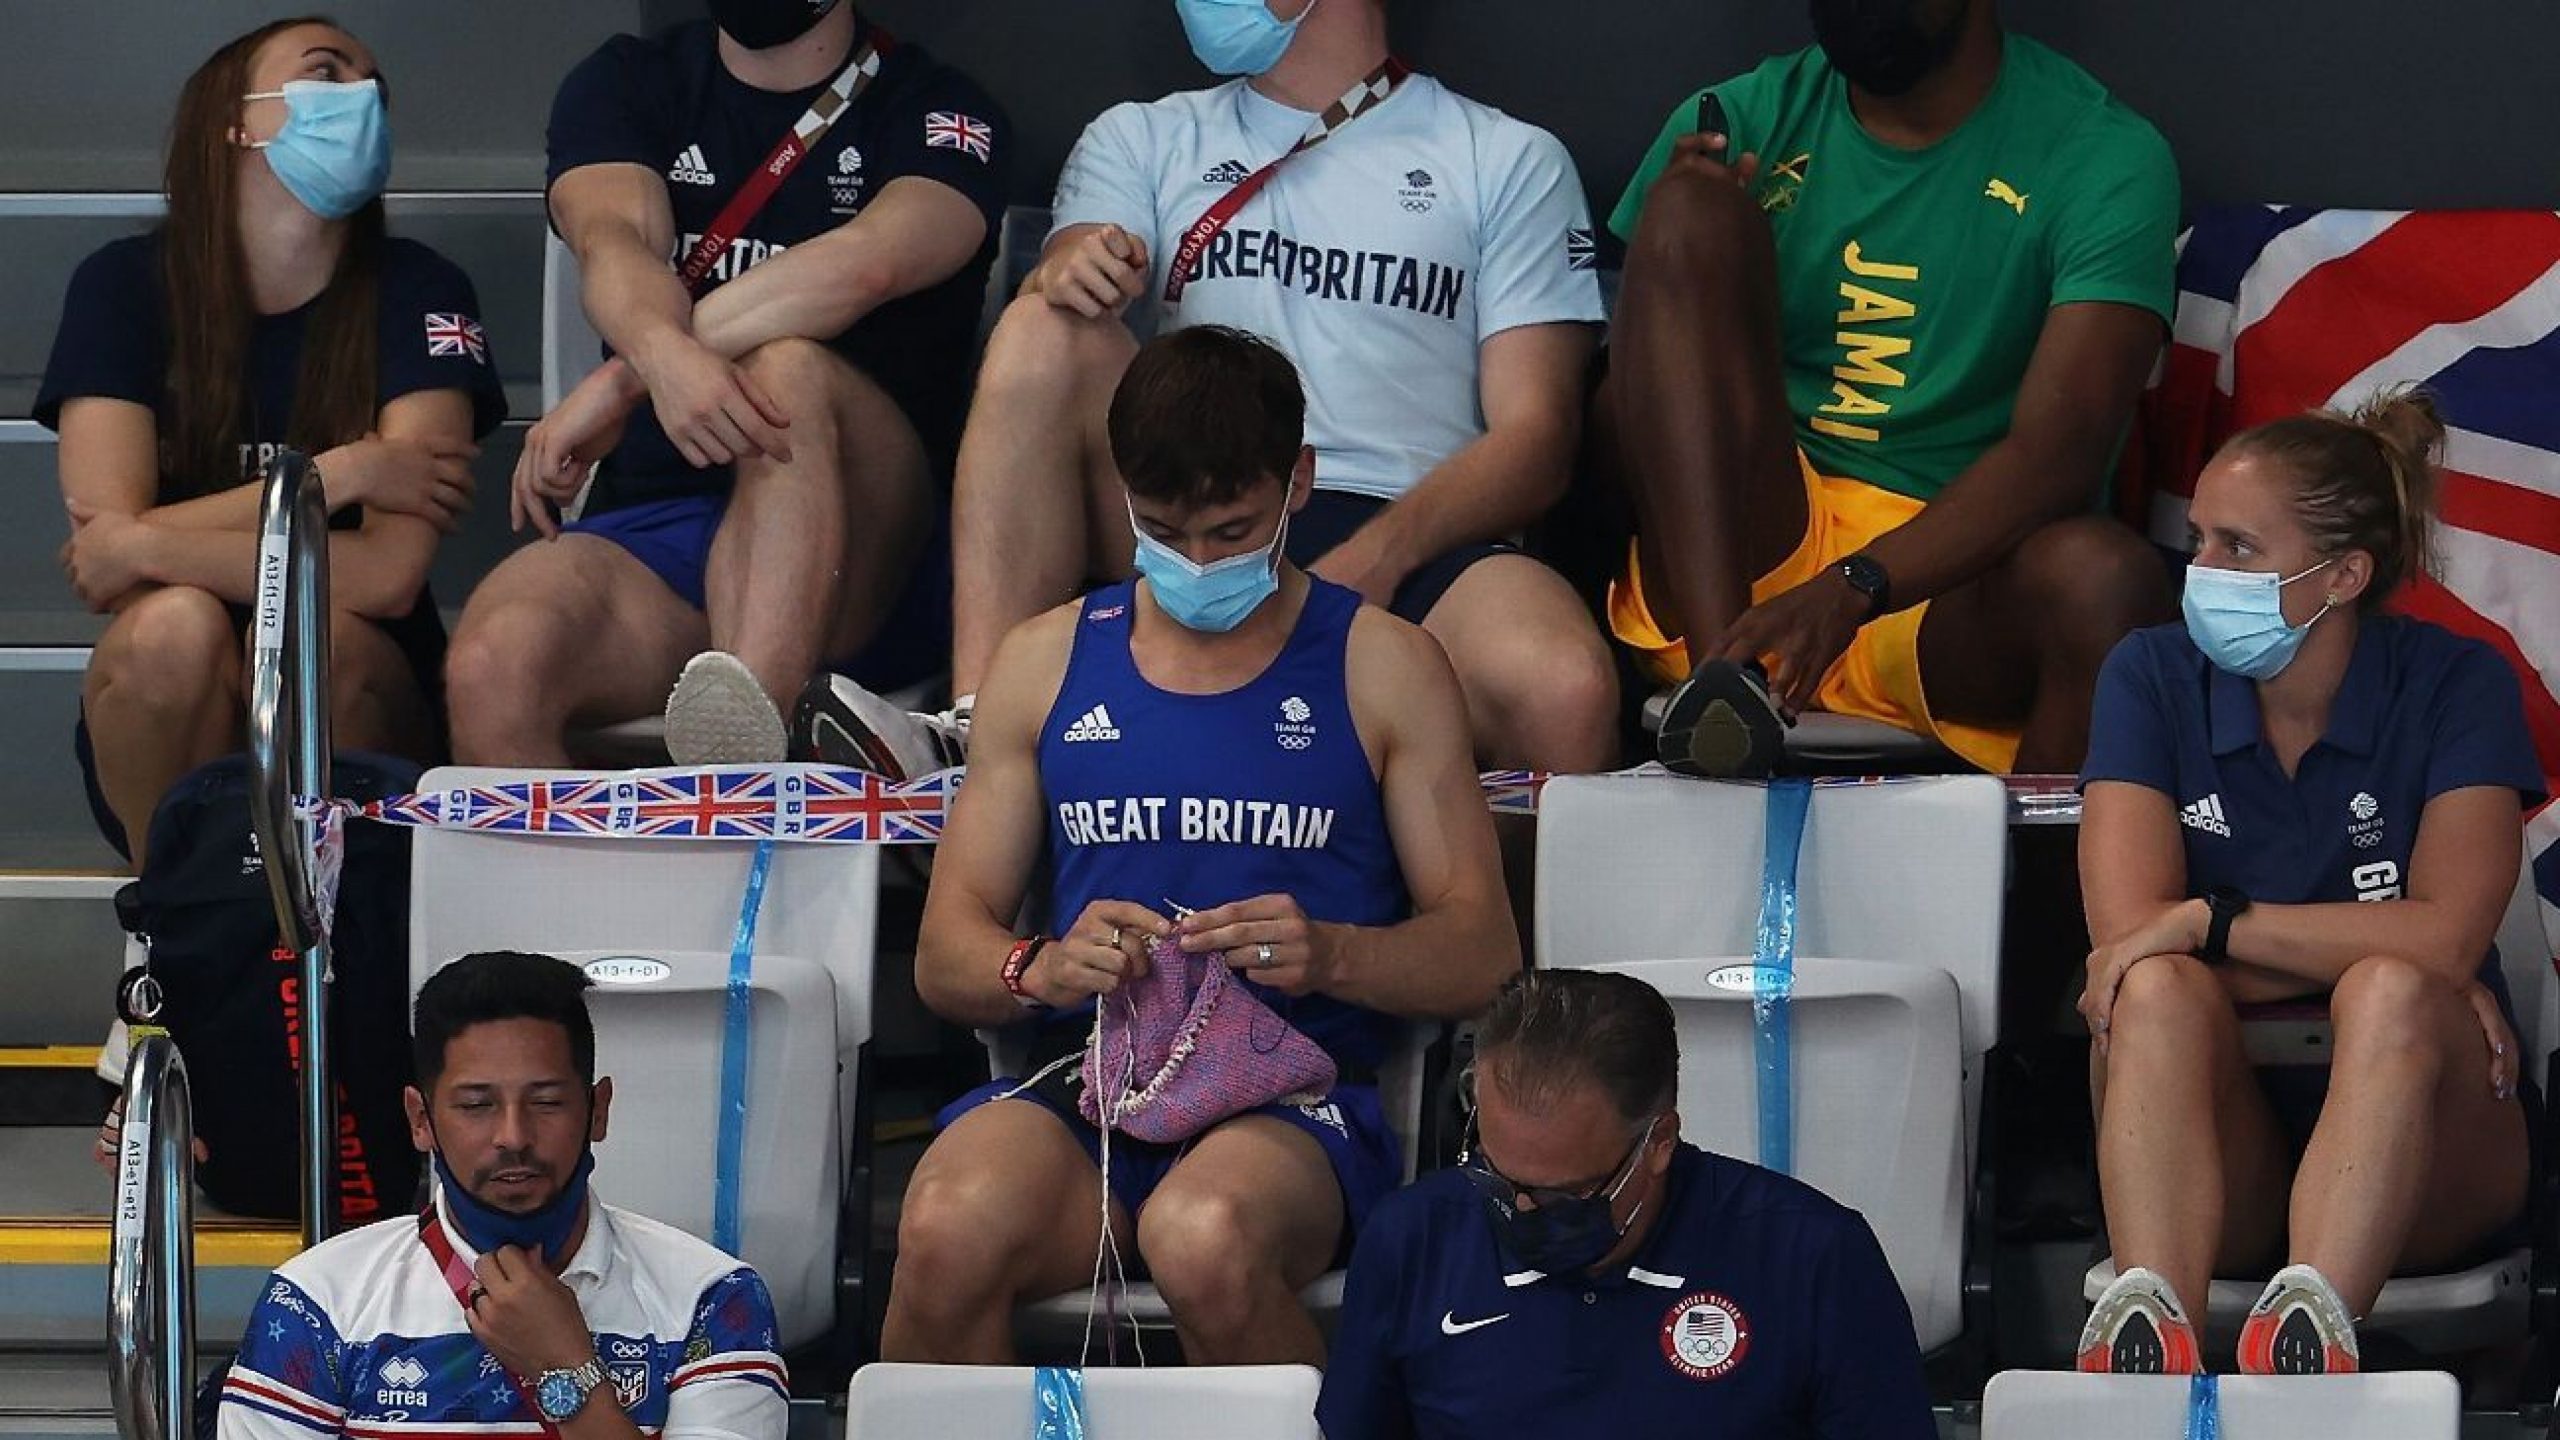 Great Britain diver Tom Daley knits while in stands at Tokyo Olympics